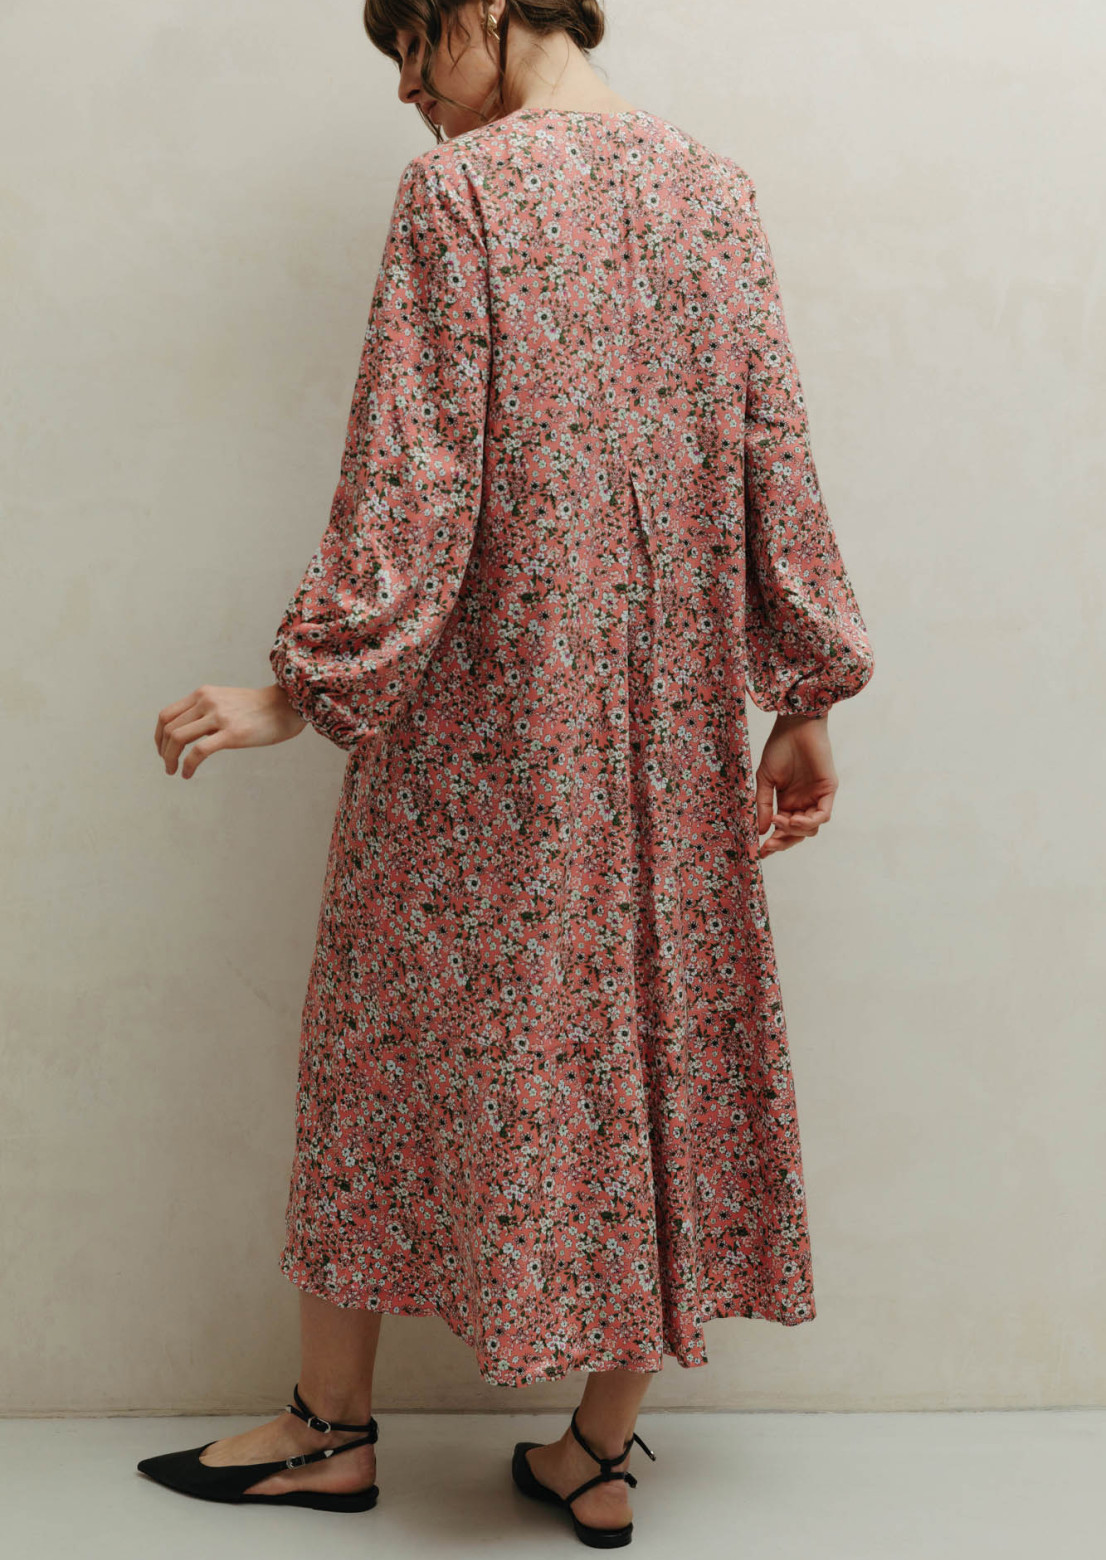 Coral color dress in a flower pattern with voluminous sleeves